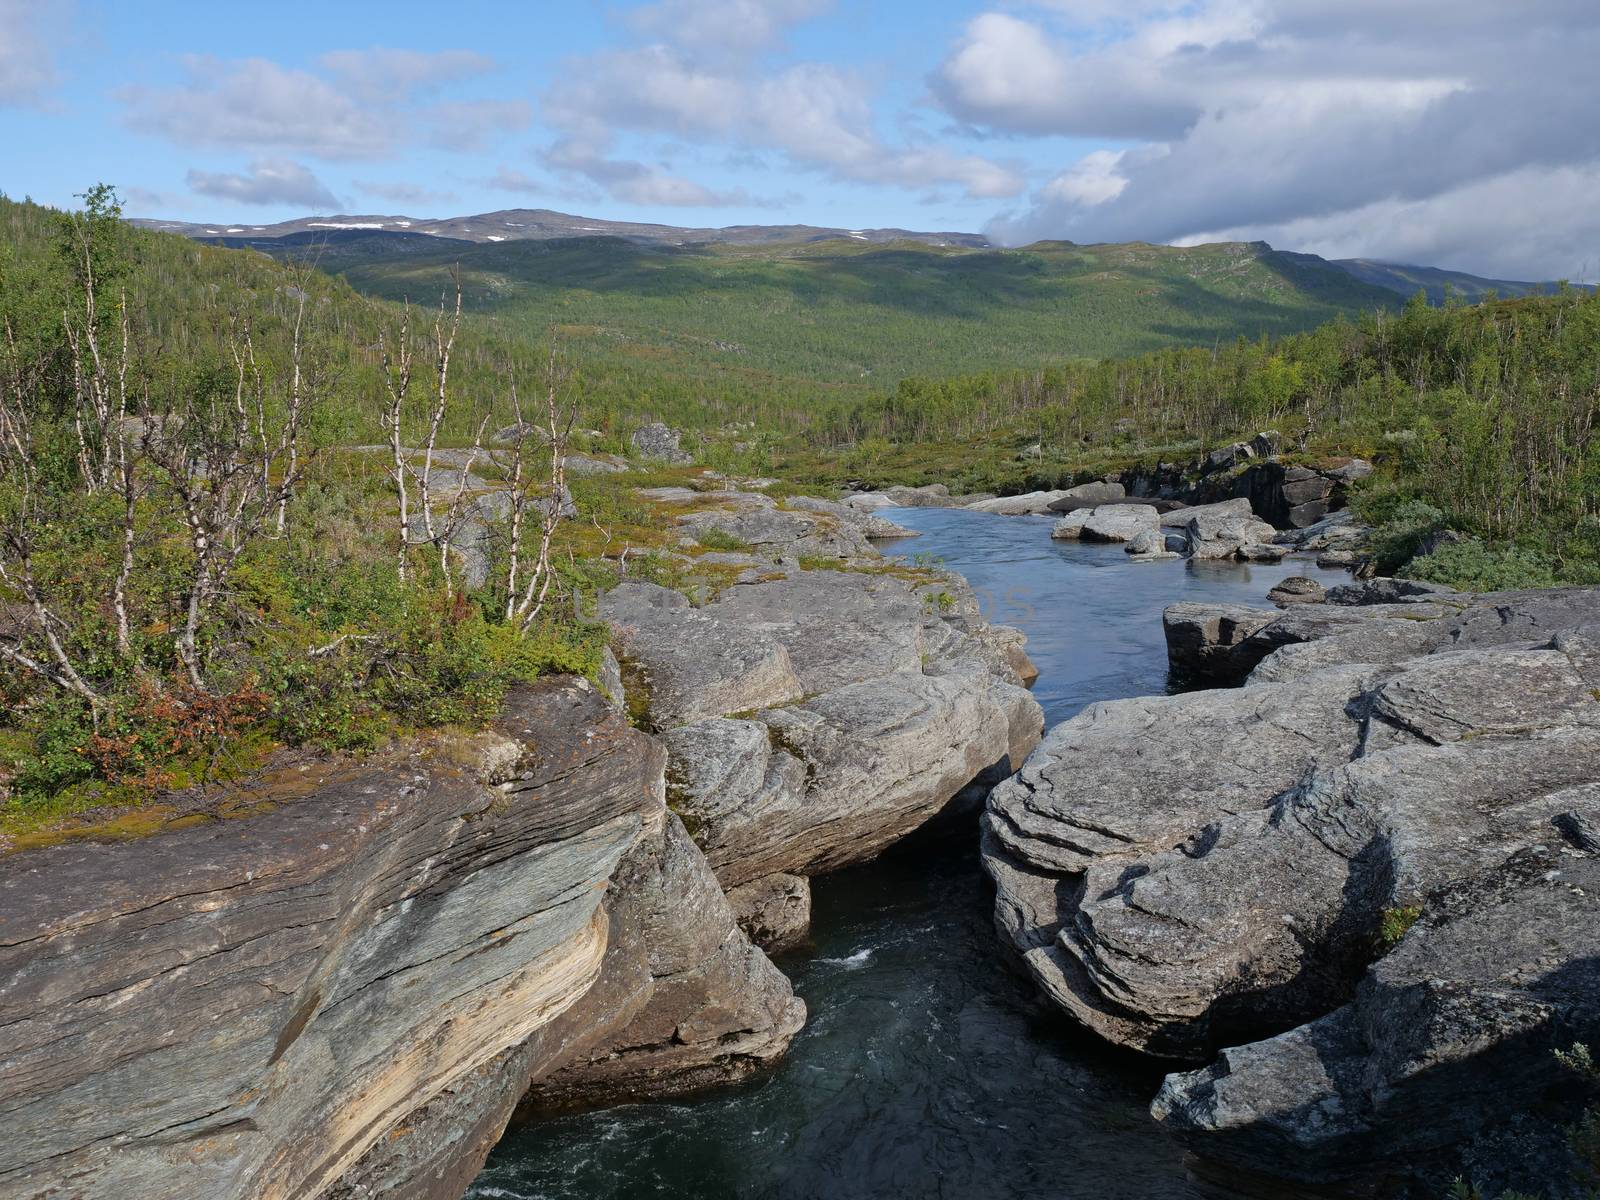 Blue glacial river canyon with granite rork boulders., birch tree forest and mountains. Abisko National Park, Lapland, Northern Sweden, at the start of Kungsleden trail. Summer sunny day.